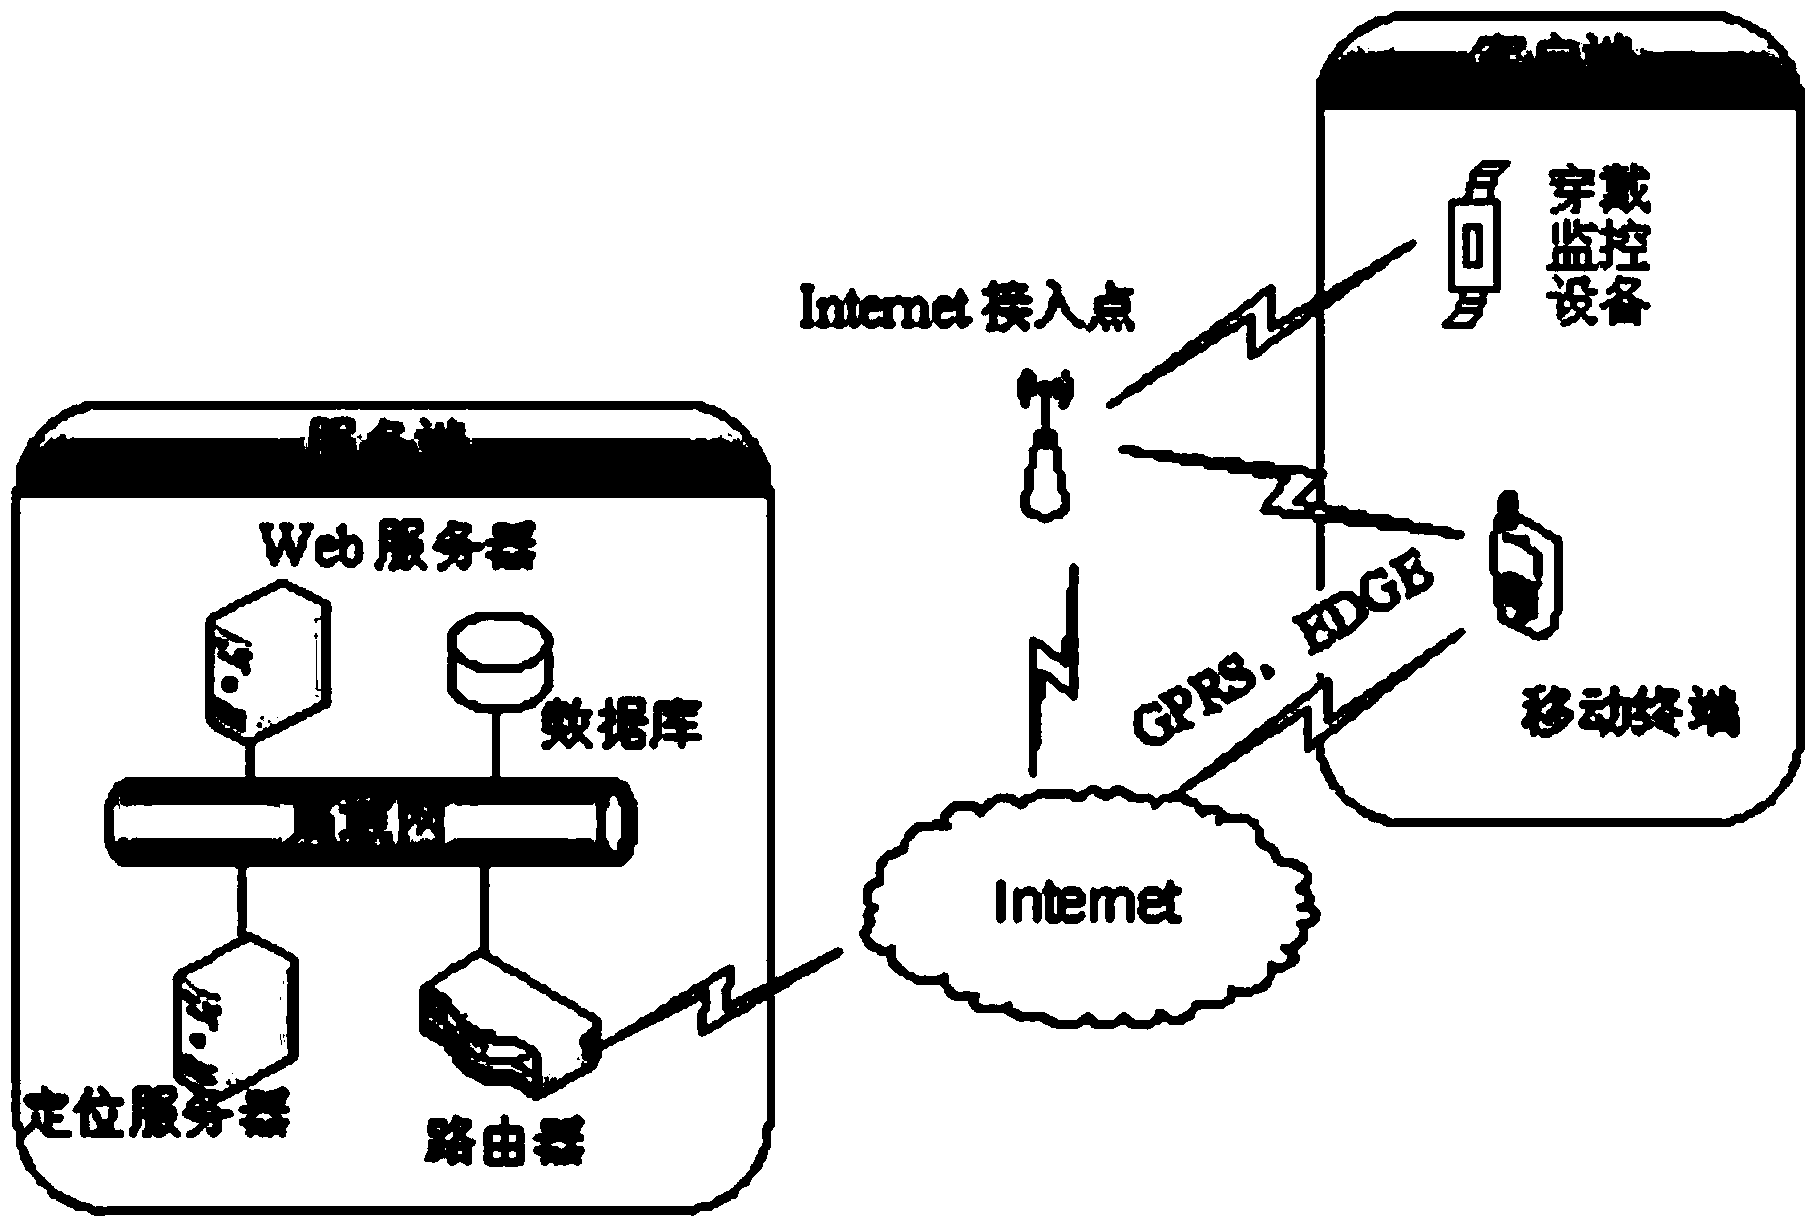 Prison indoor positioning system based on WiFi